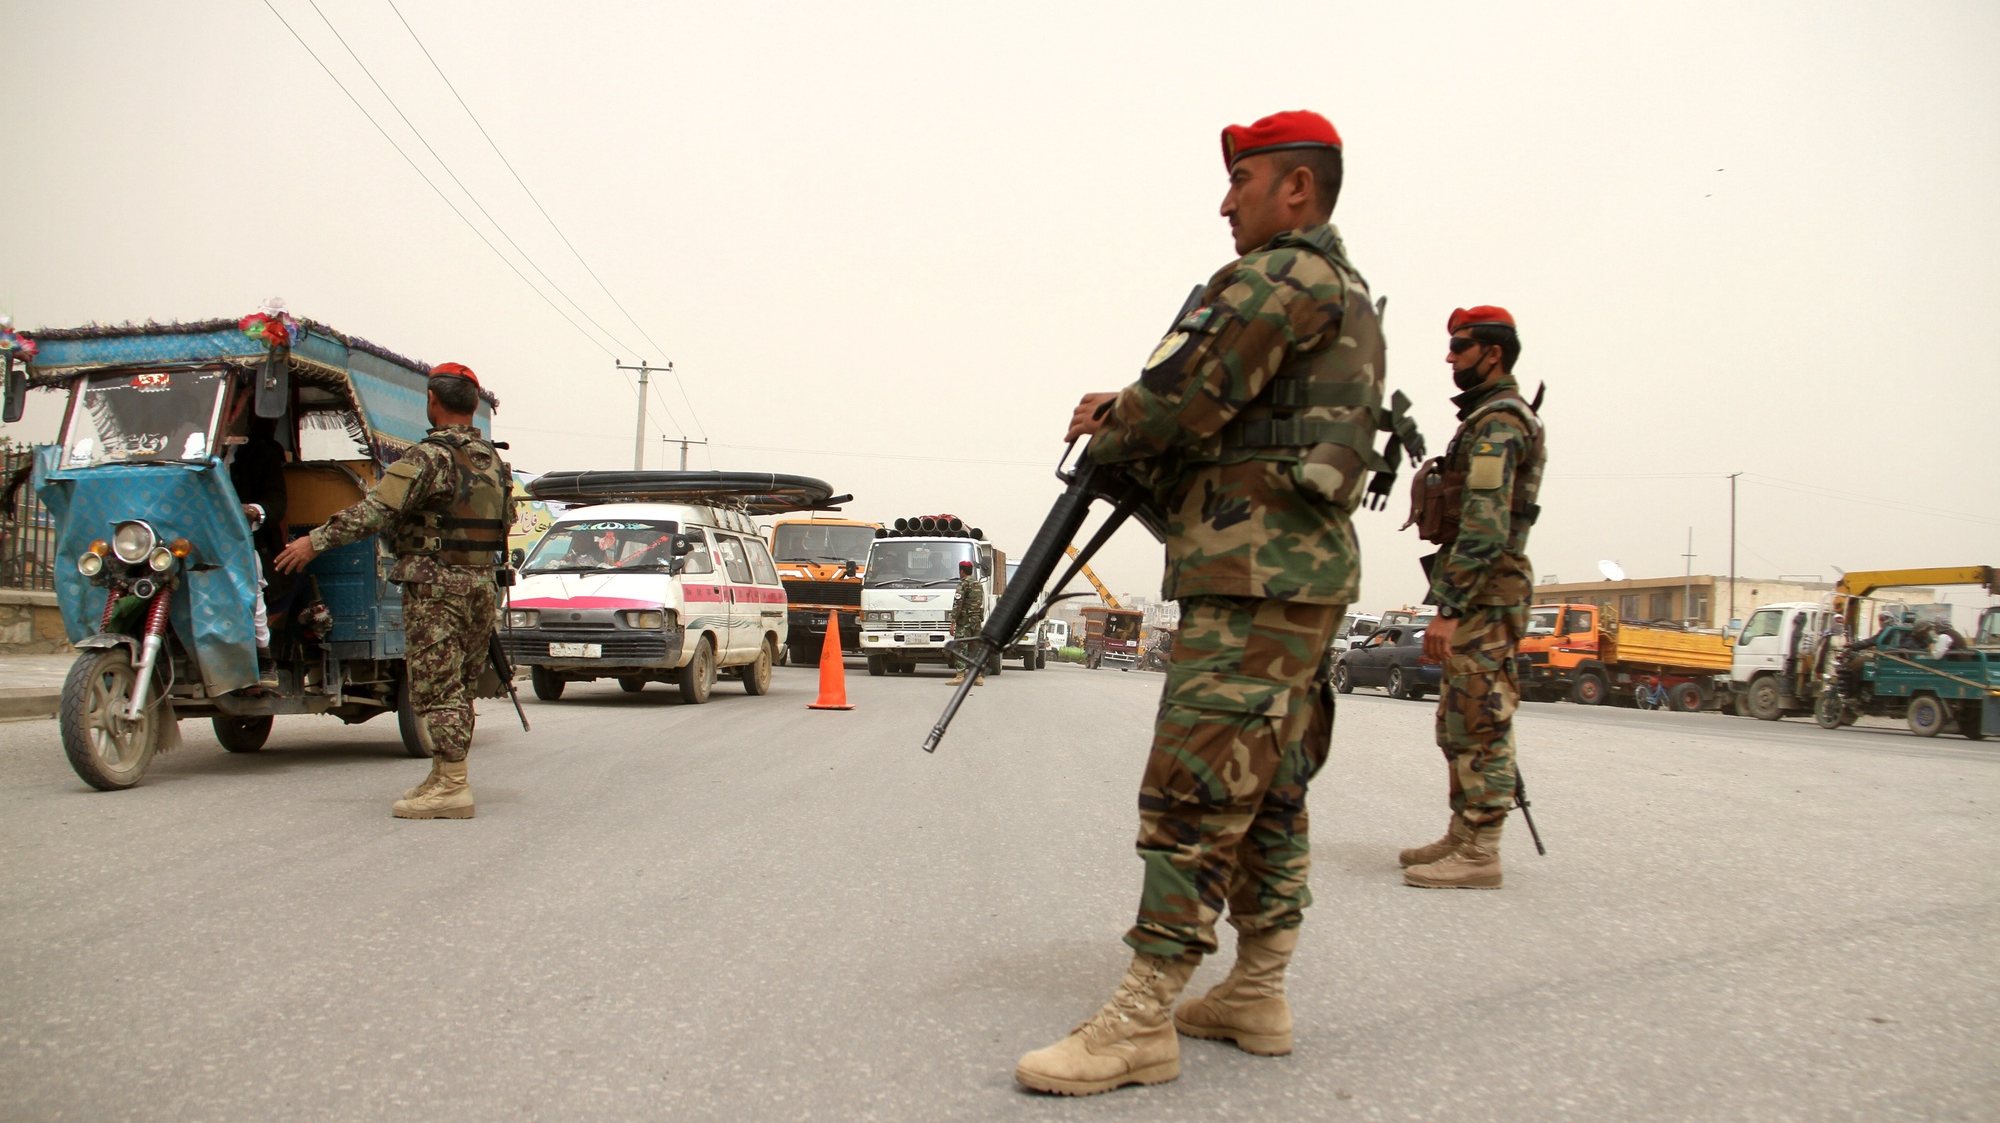 epa05921131 Afghan army soldiers stand guard on a roadside as security has been high intensified following a military base attack in Balkh province, in Ghazni, Afghanistan, 22 April 2017. According to latest media reports on 22 April 2017, at least 140 Afghan soldiers were killed when Taliban fighters attacked the army base in Mazar-i-Sharif on 21 April. The attack, perpetrated by as many as 10 fighters, occurred as the soldiers were leaving a mosque after Friday prayers and eating dinner at the base&#039;s canteen.  EPA/GHULAM MUSTAFA